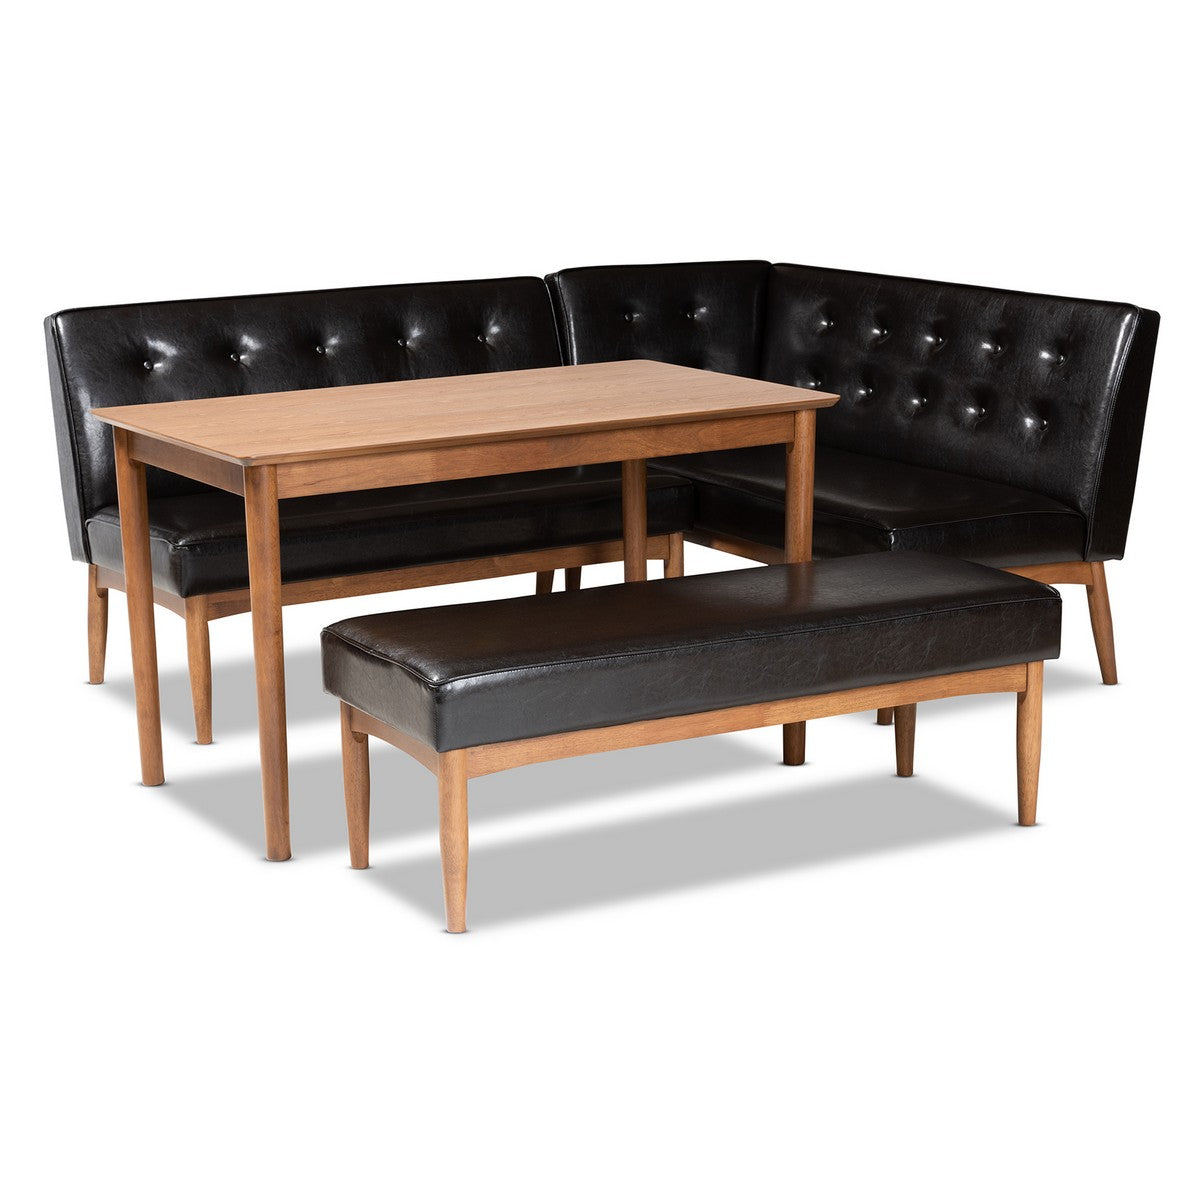 Baxton Studio Arvid Mid-Century Modern Dark Brown Faux Leather Upholstered 4-Piece Wood Dining Nook Set Baxton Studio-Dining Sets-Minimal And Modern - 1